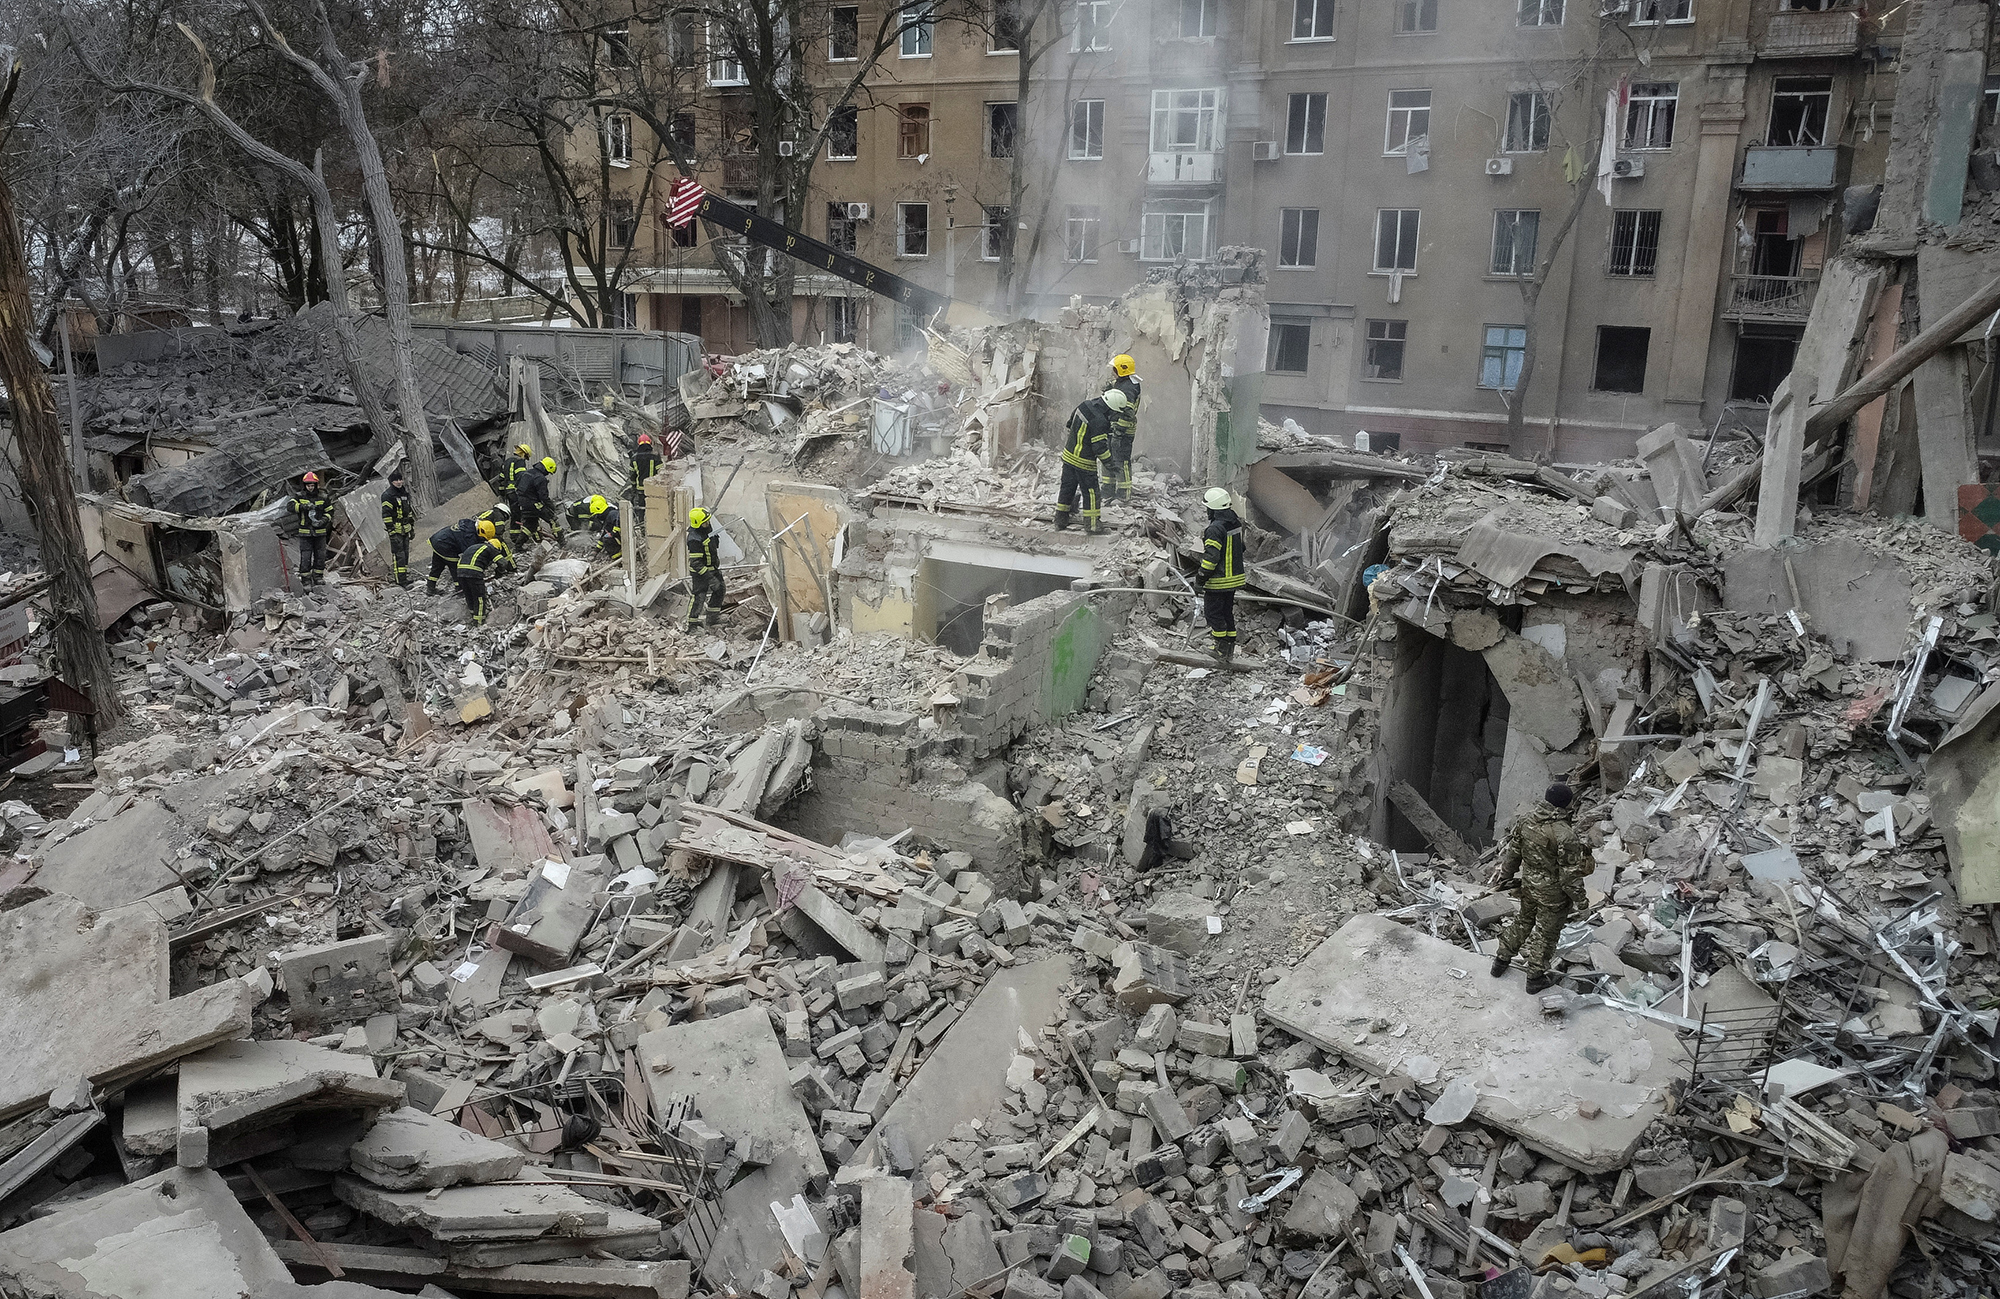 Rescuers work at the site of a residential building destroyed by a Russian missile strike, in Kramatorsk, Ukraine, on February 2.